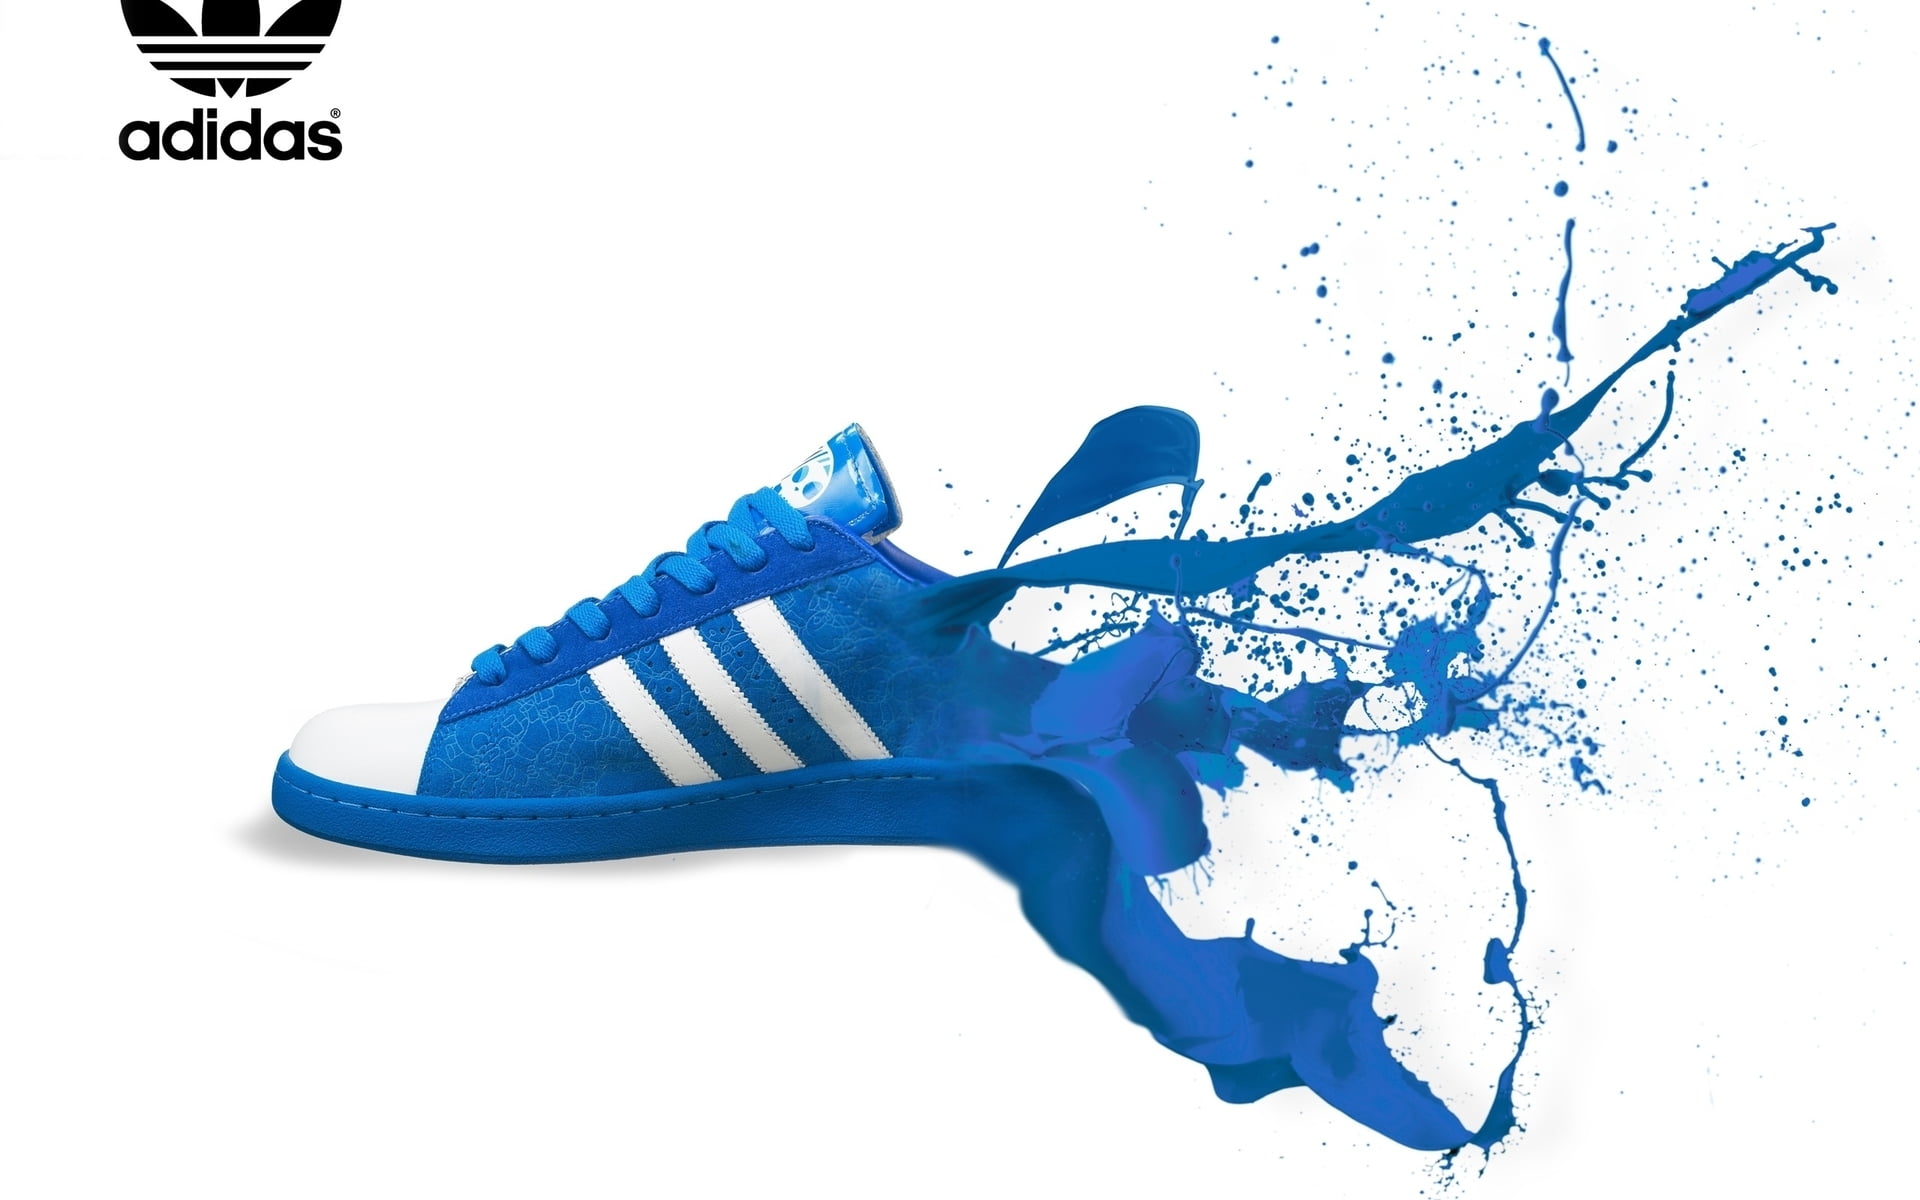 Blue And White Adidas Superstar Illustration HD Wallpaper